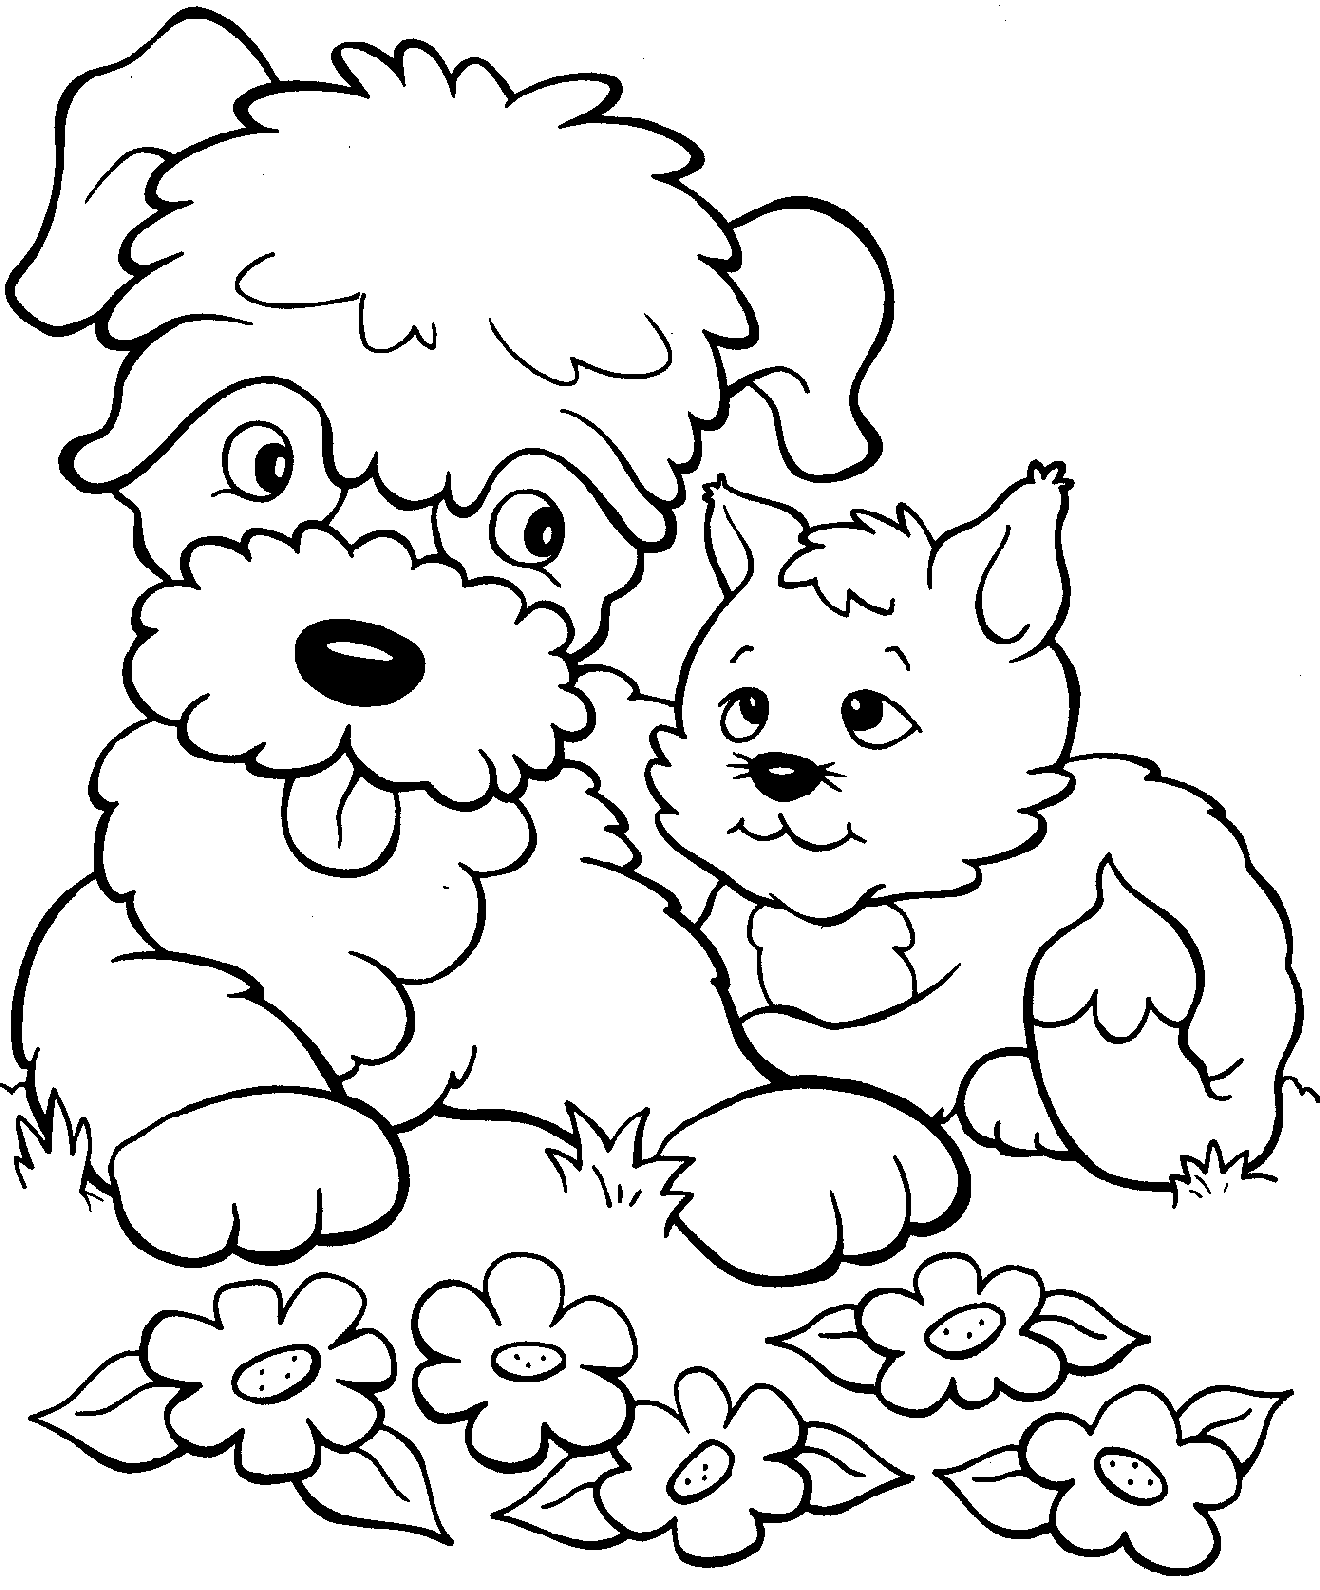 coloring pages of kittens to print kitten coloring pages best coloring pages for kids of print kittens pages to coloring 